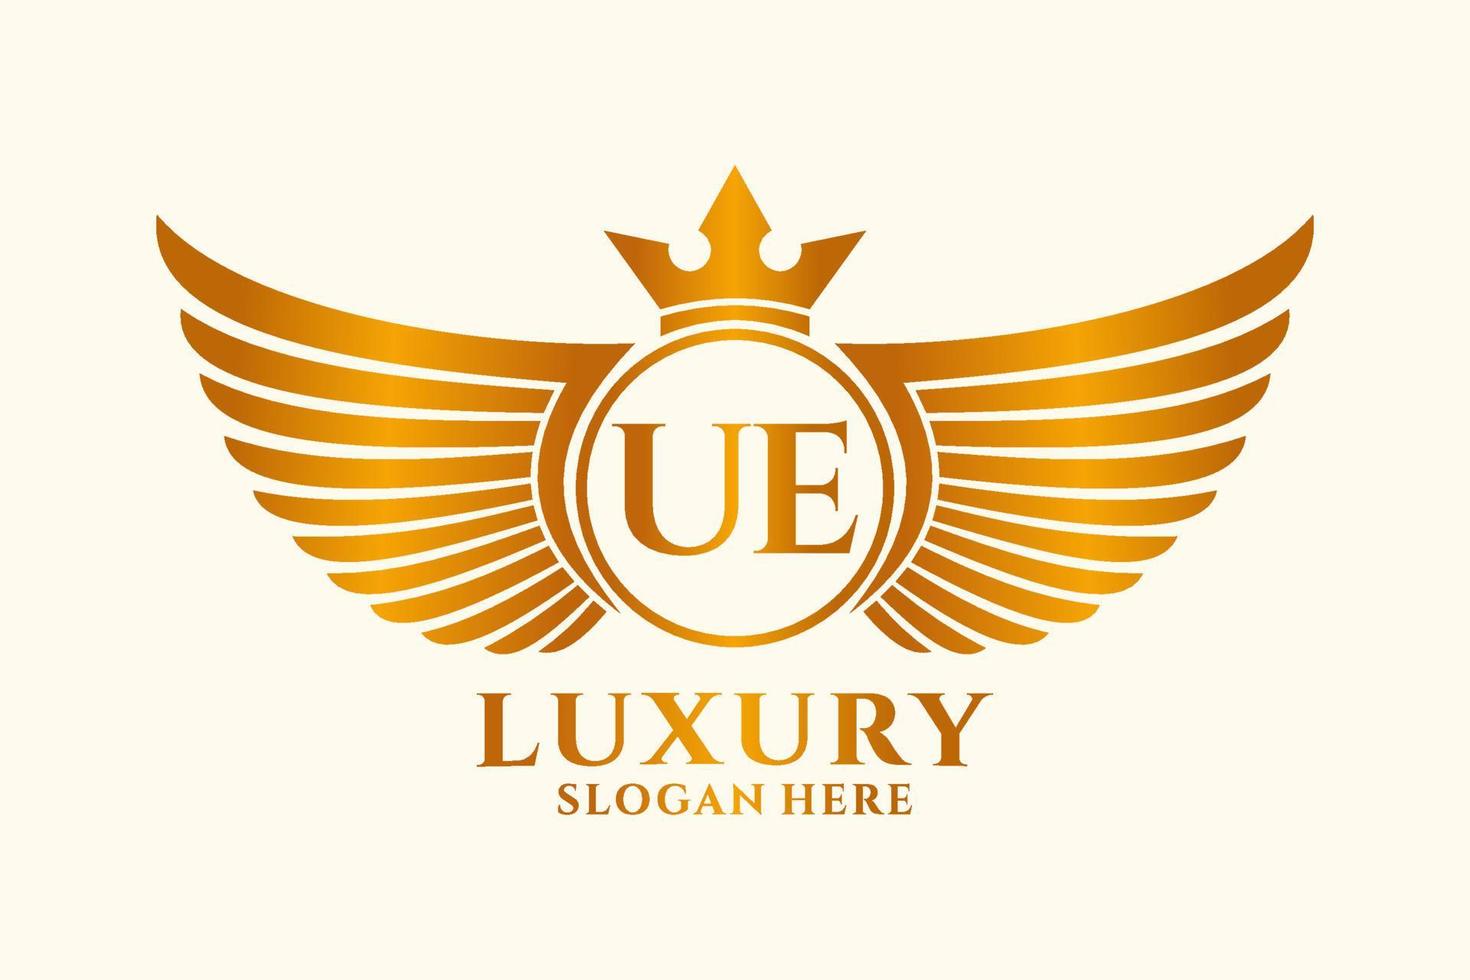 Luxury royal wing Letter UE crest Gold color Logo vector, Victory logo, crest logo, wing logo, vector logo template.